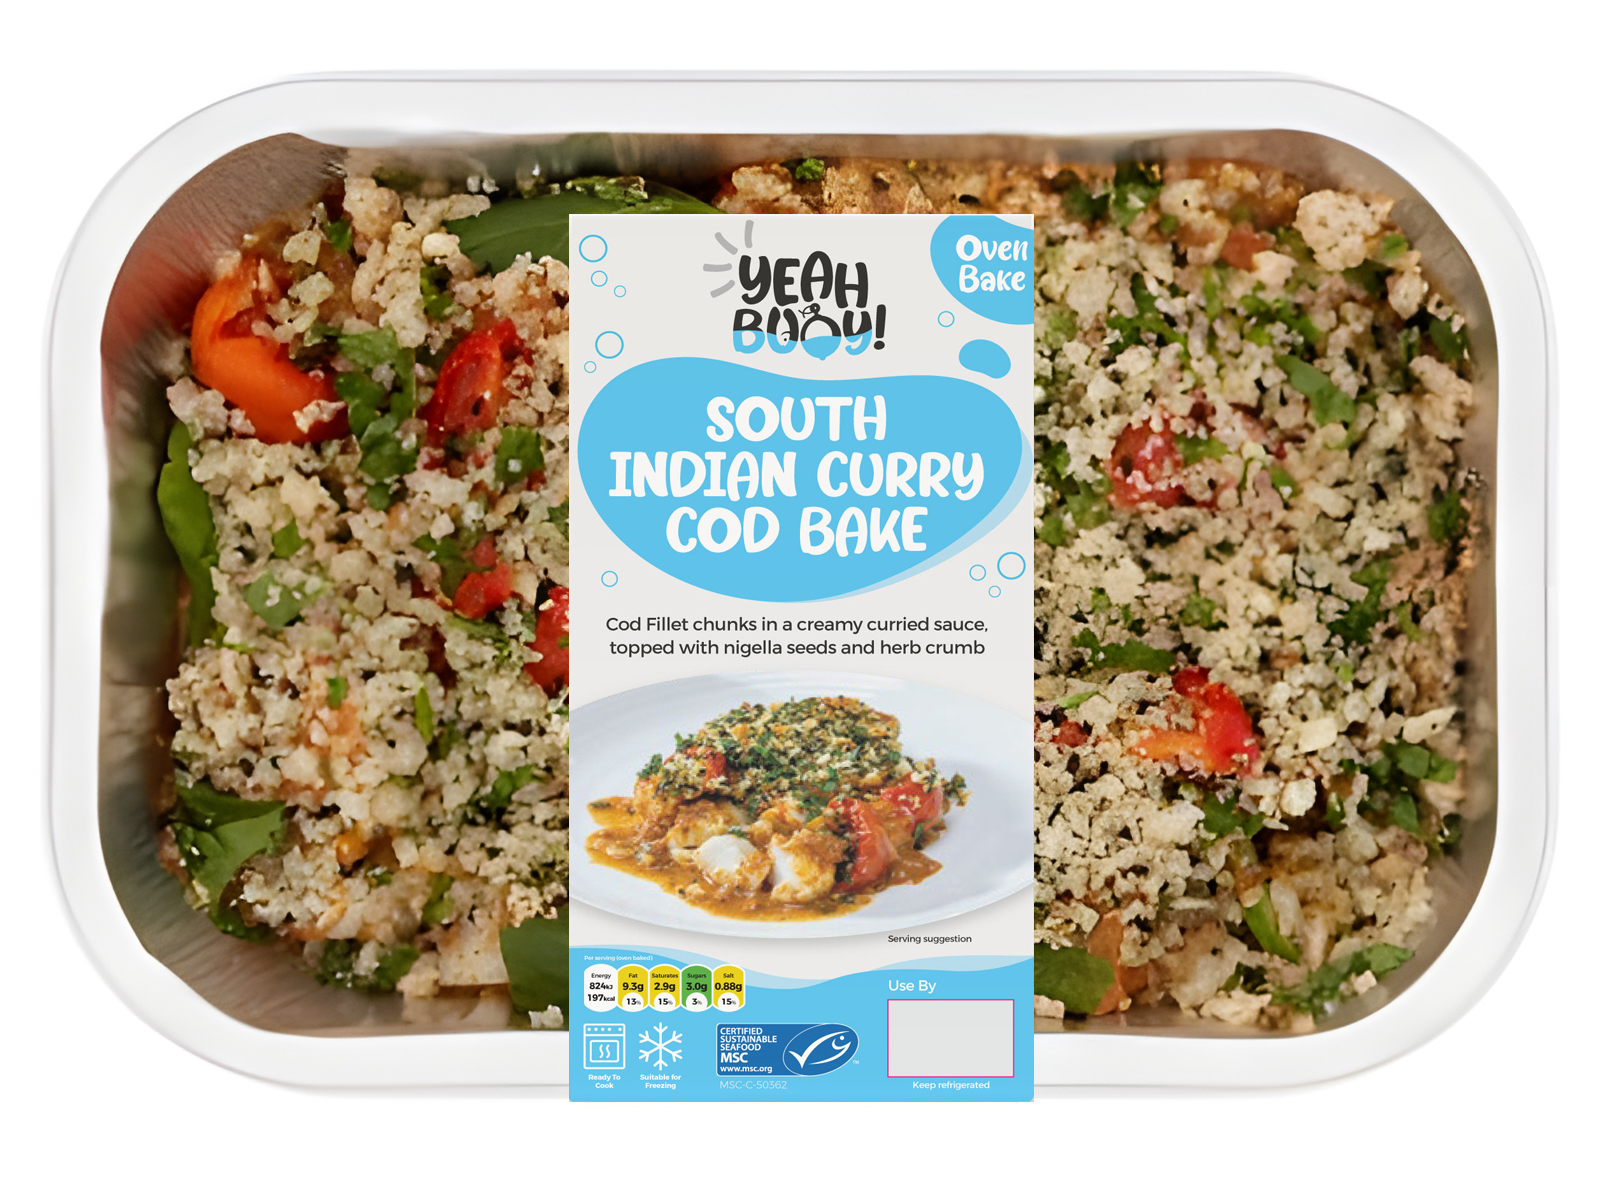 Yeah Buoy! South Indian couscous in a plastic container - a Waitrose product range.